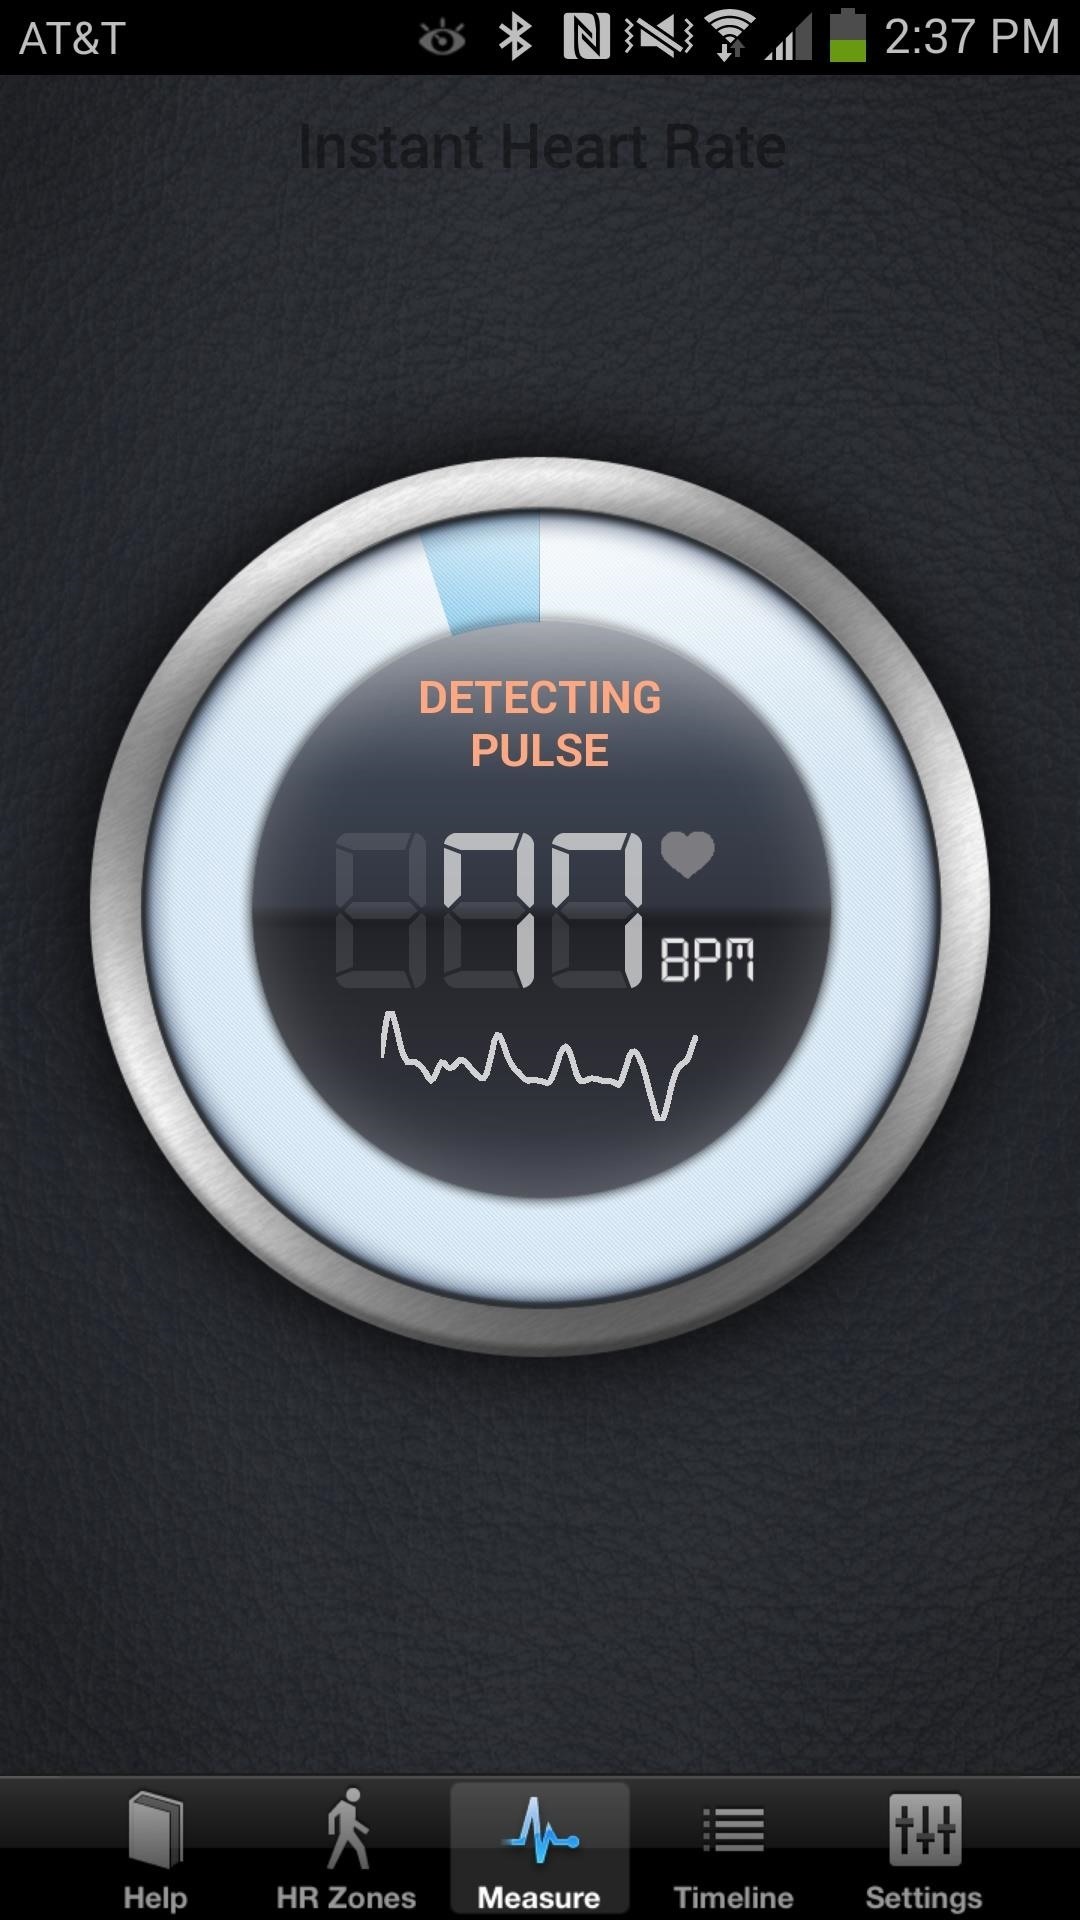 Attention: Your Galaxy Note 3 Can Be Used as a Heart Rate Monitor